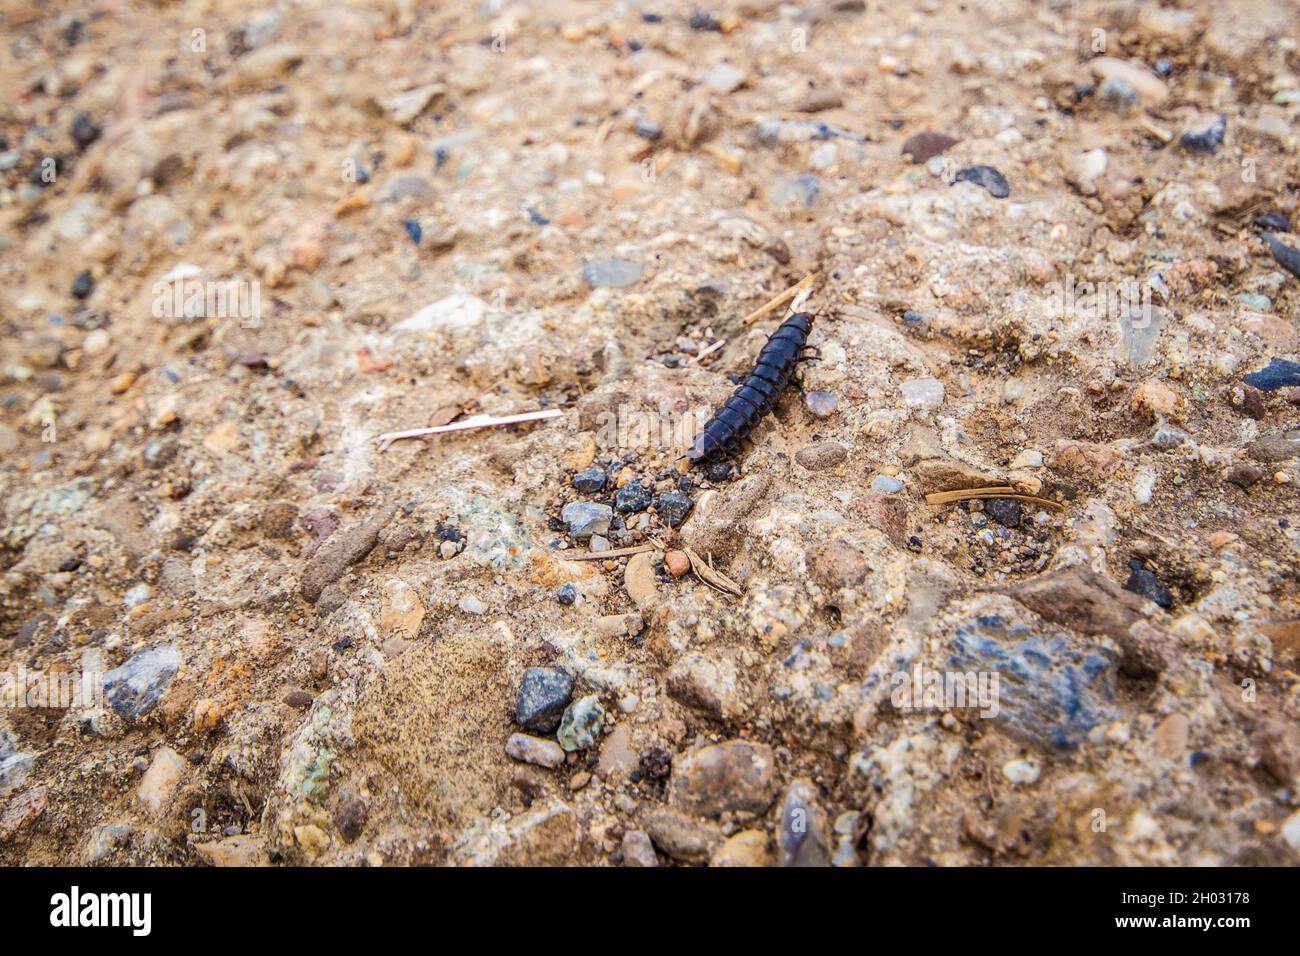 Black Myriapoda Millipede insect crawling on the ground close up | Small black Diplopoda insect walking on the ground with some rocks on sunny day Stock Photo